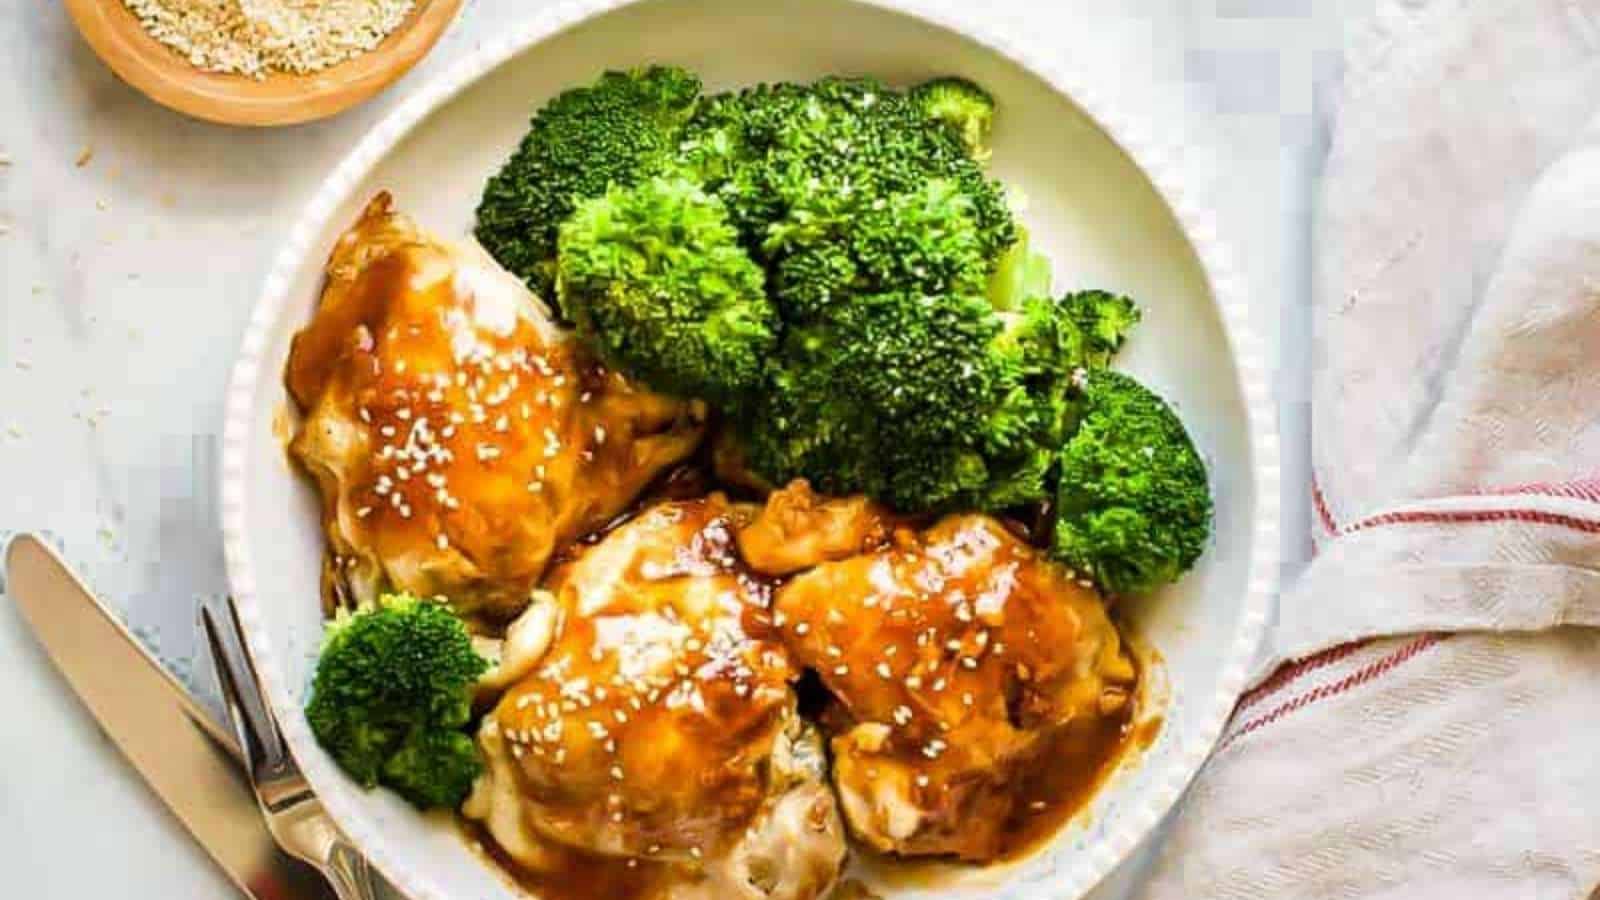 Asian chicken with broccoli and sesame seeds.